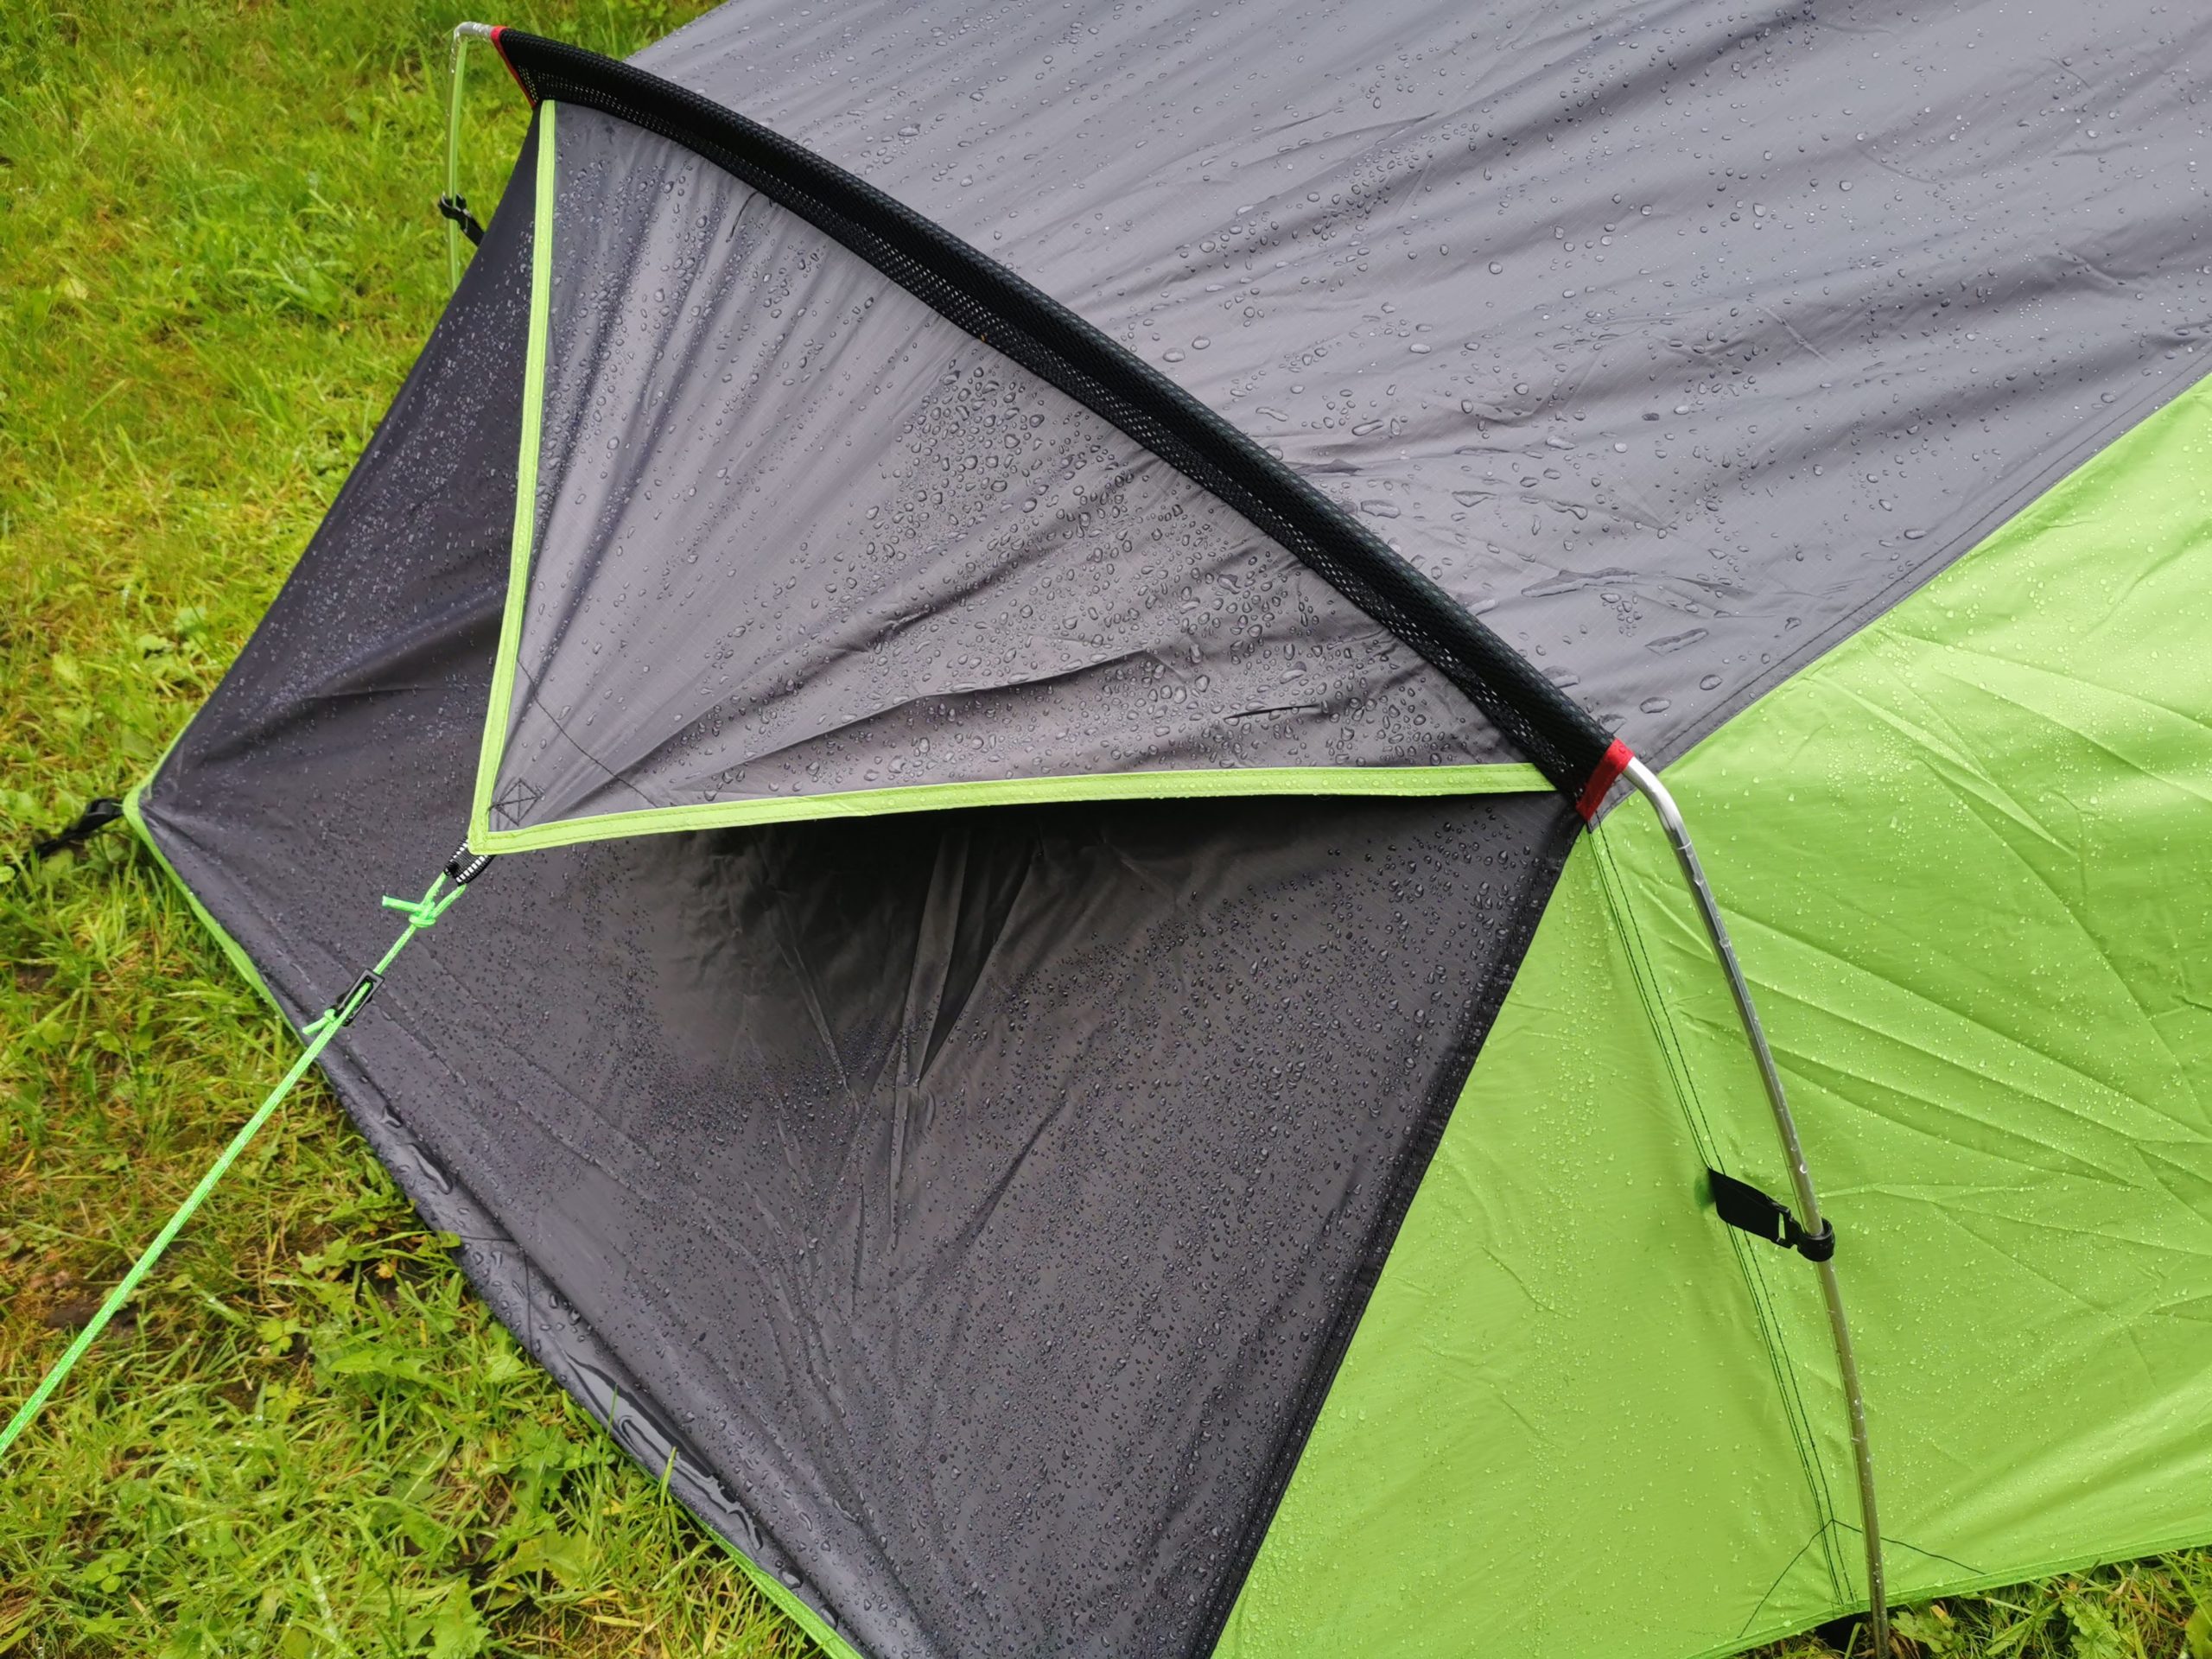 Wet weather camping